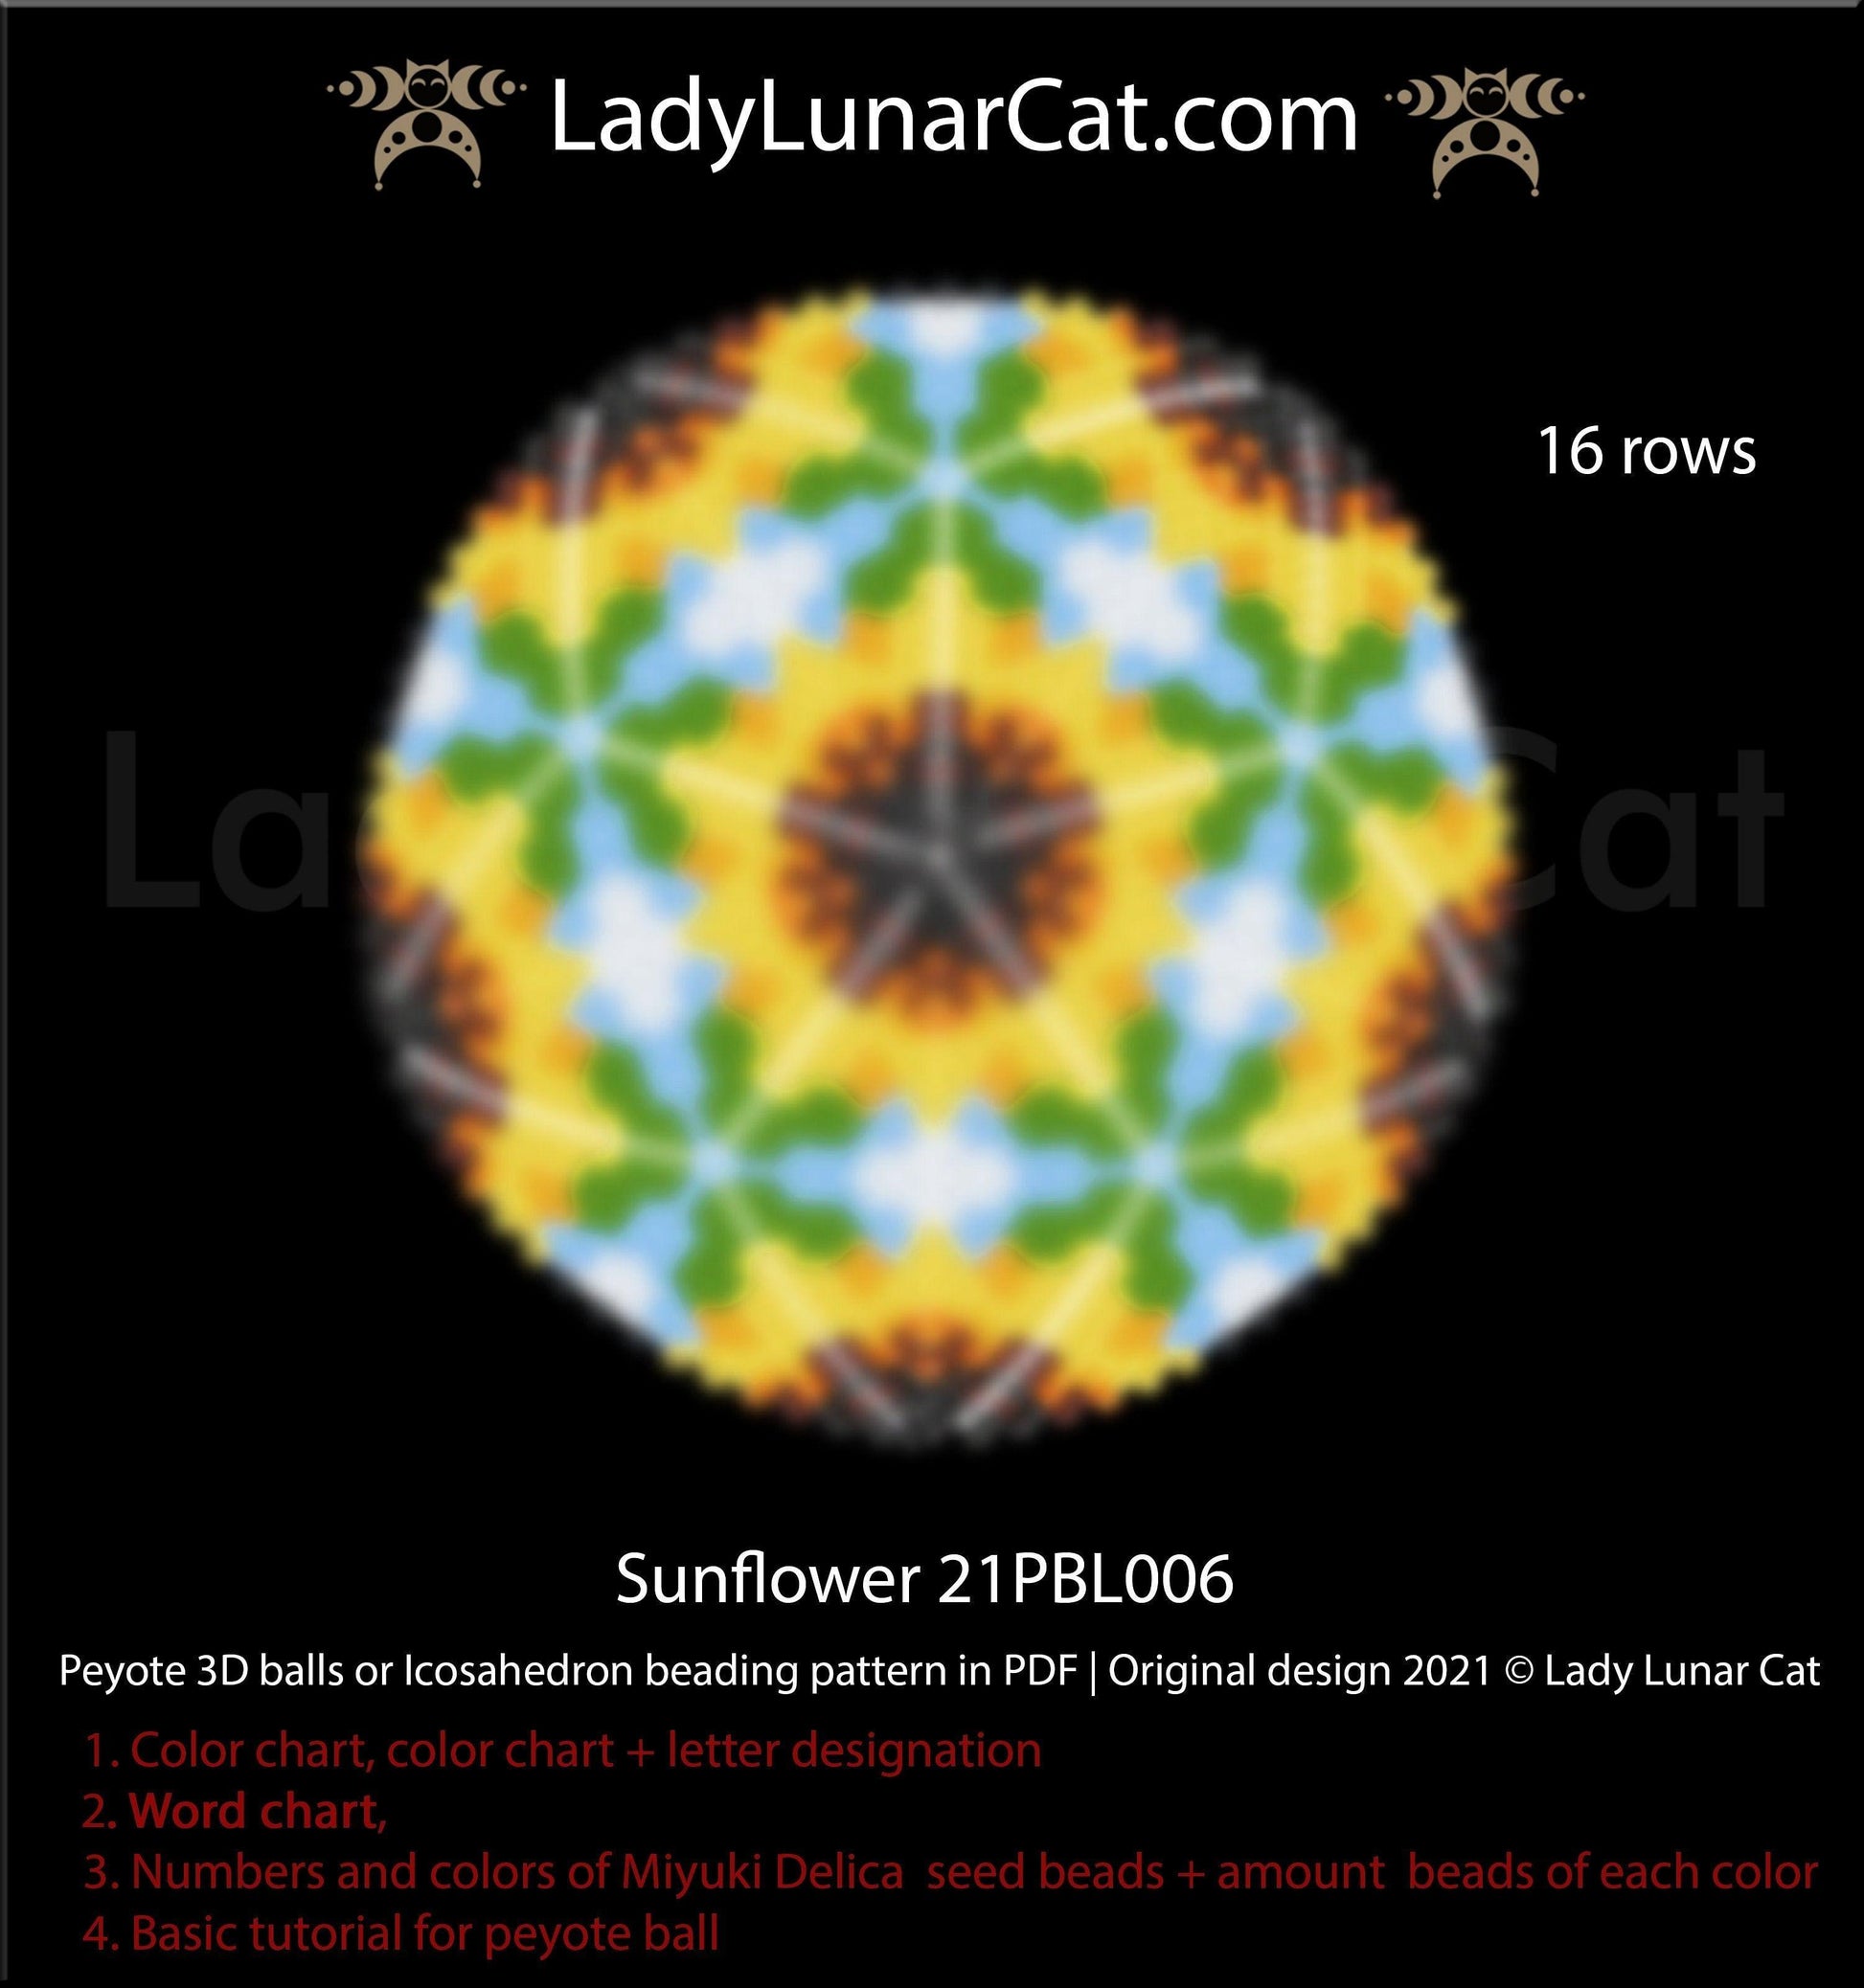 Copy of Peyote 3d ball pattern for beading | Beaded Icosahedron Clover and flowers 21PBL007 15/11/9 rows LadyLunarCat